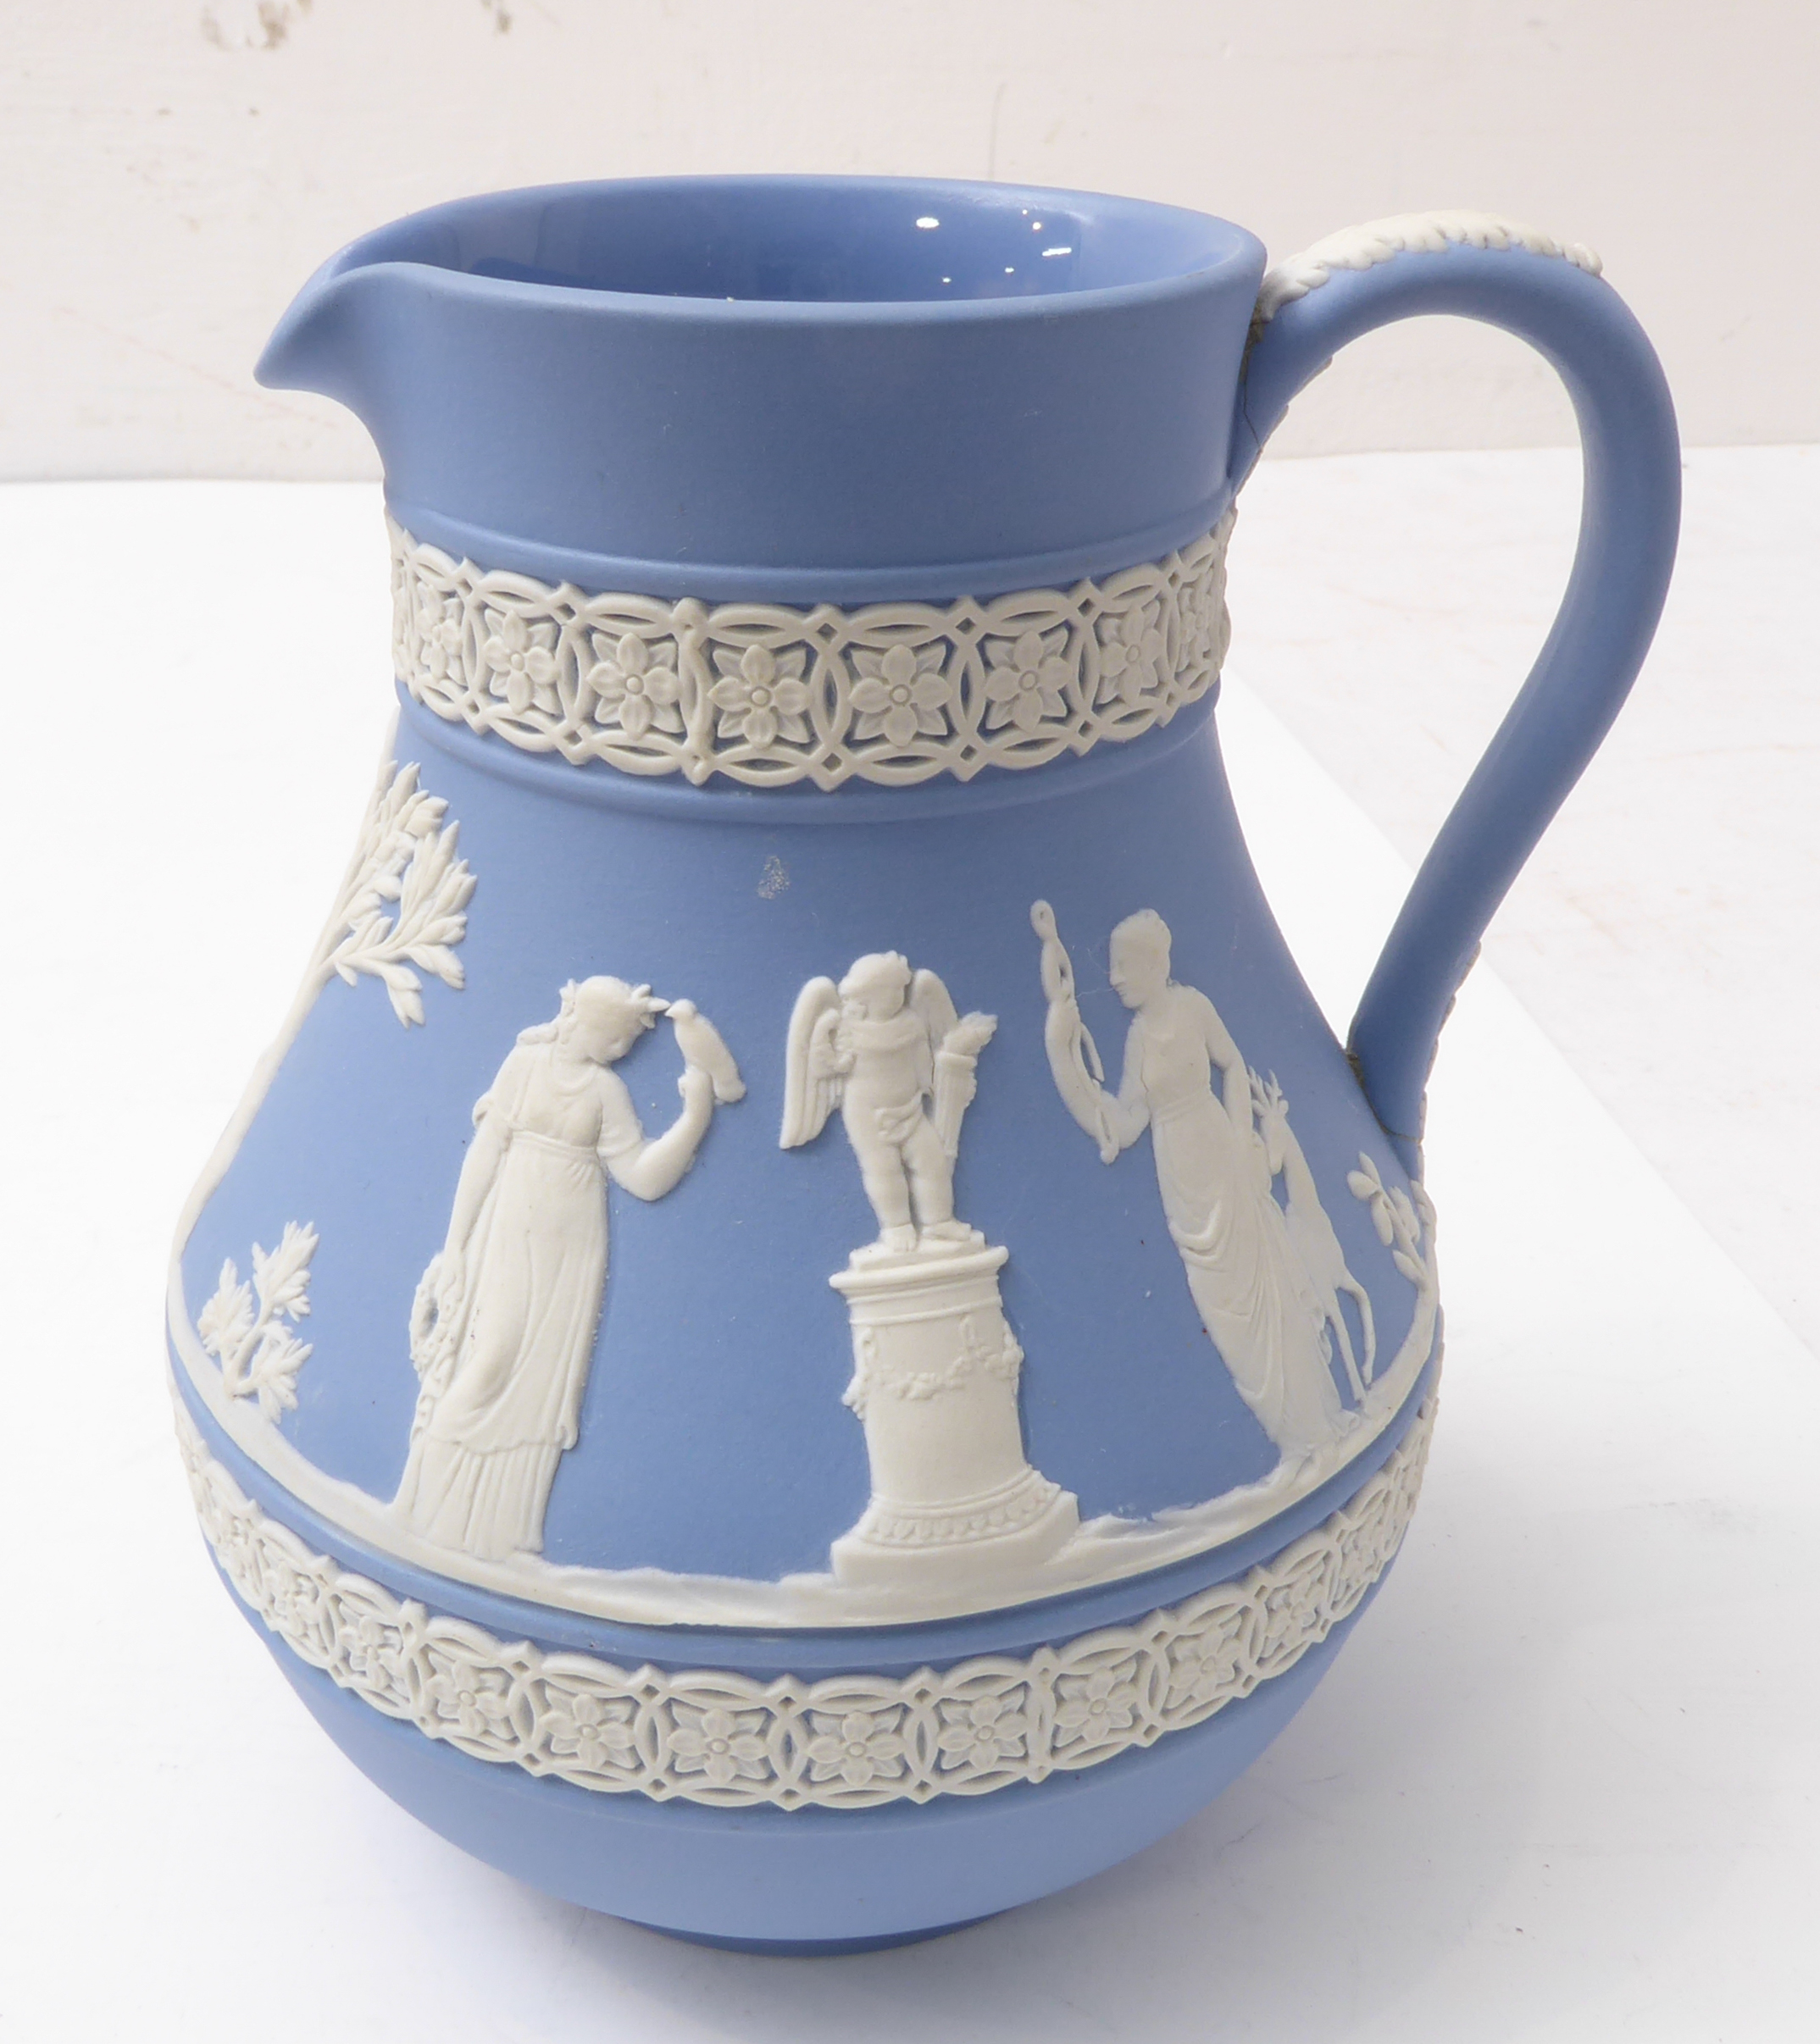 Various 19th / early 20th century Wedgwood Jasperware in typical neo-classical style with applied - Image 7 of 24